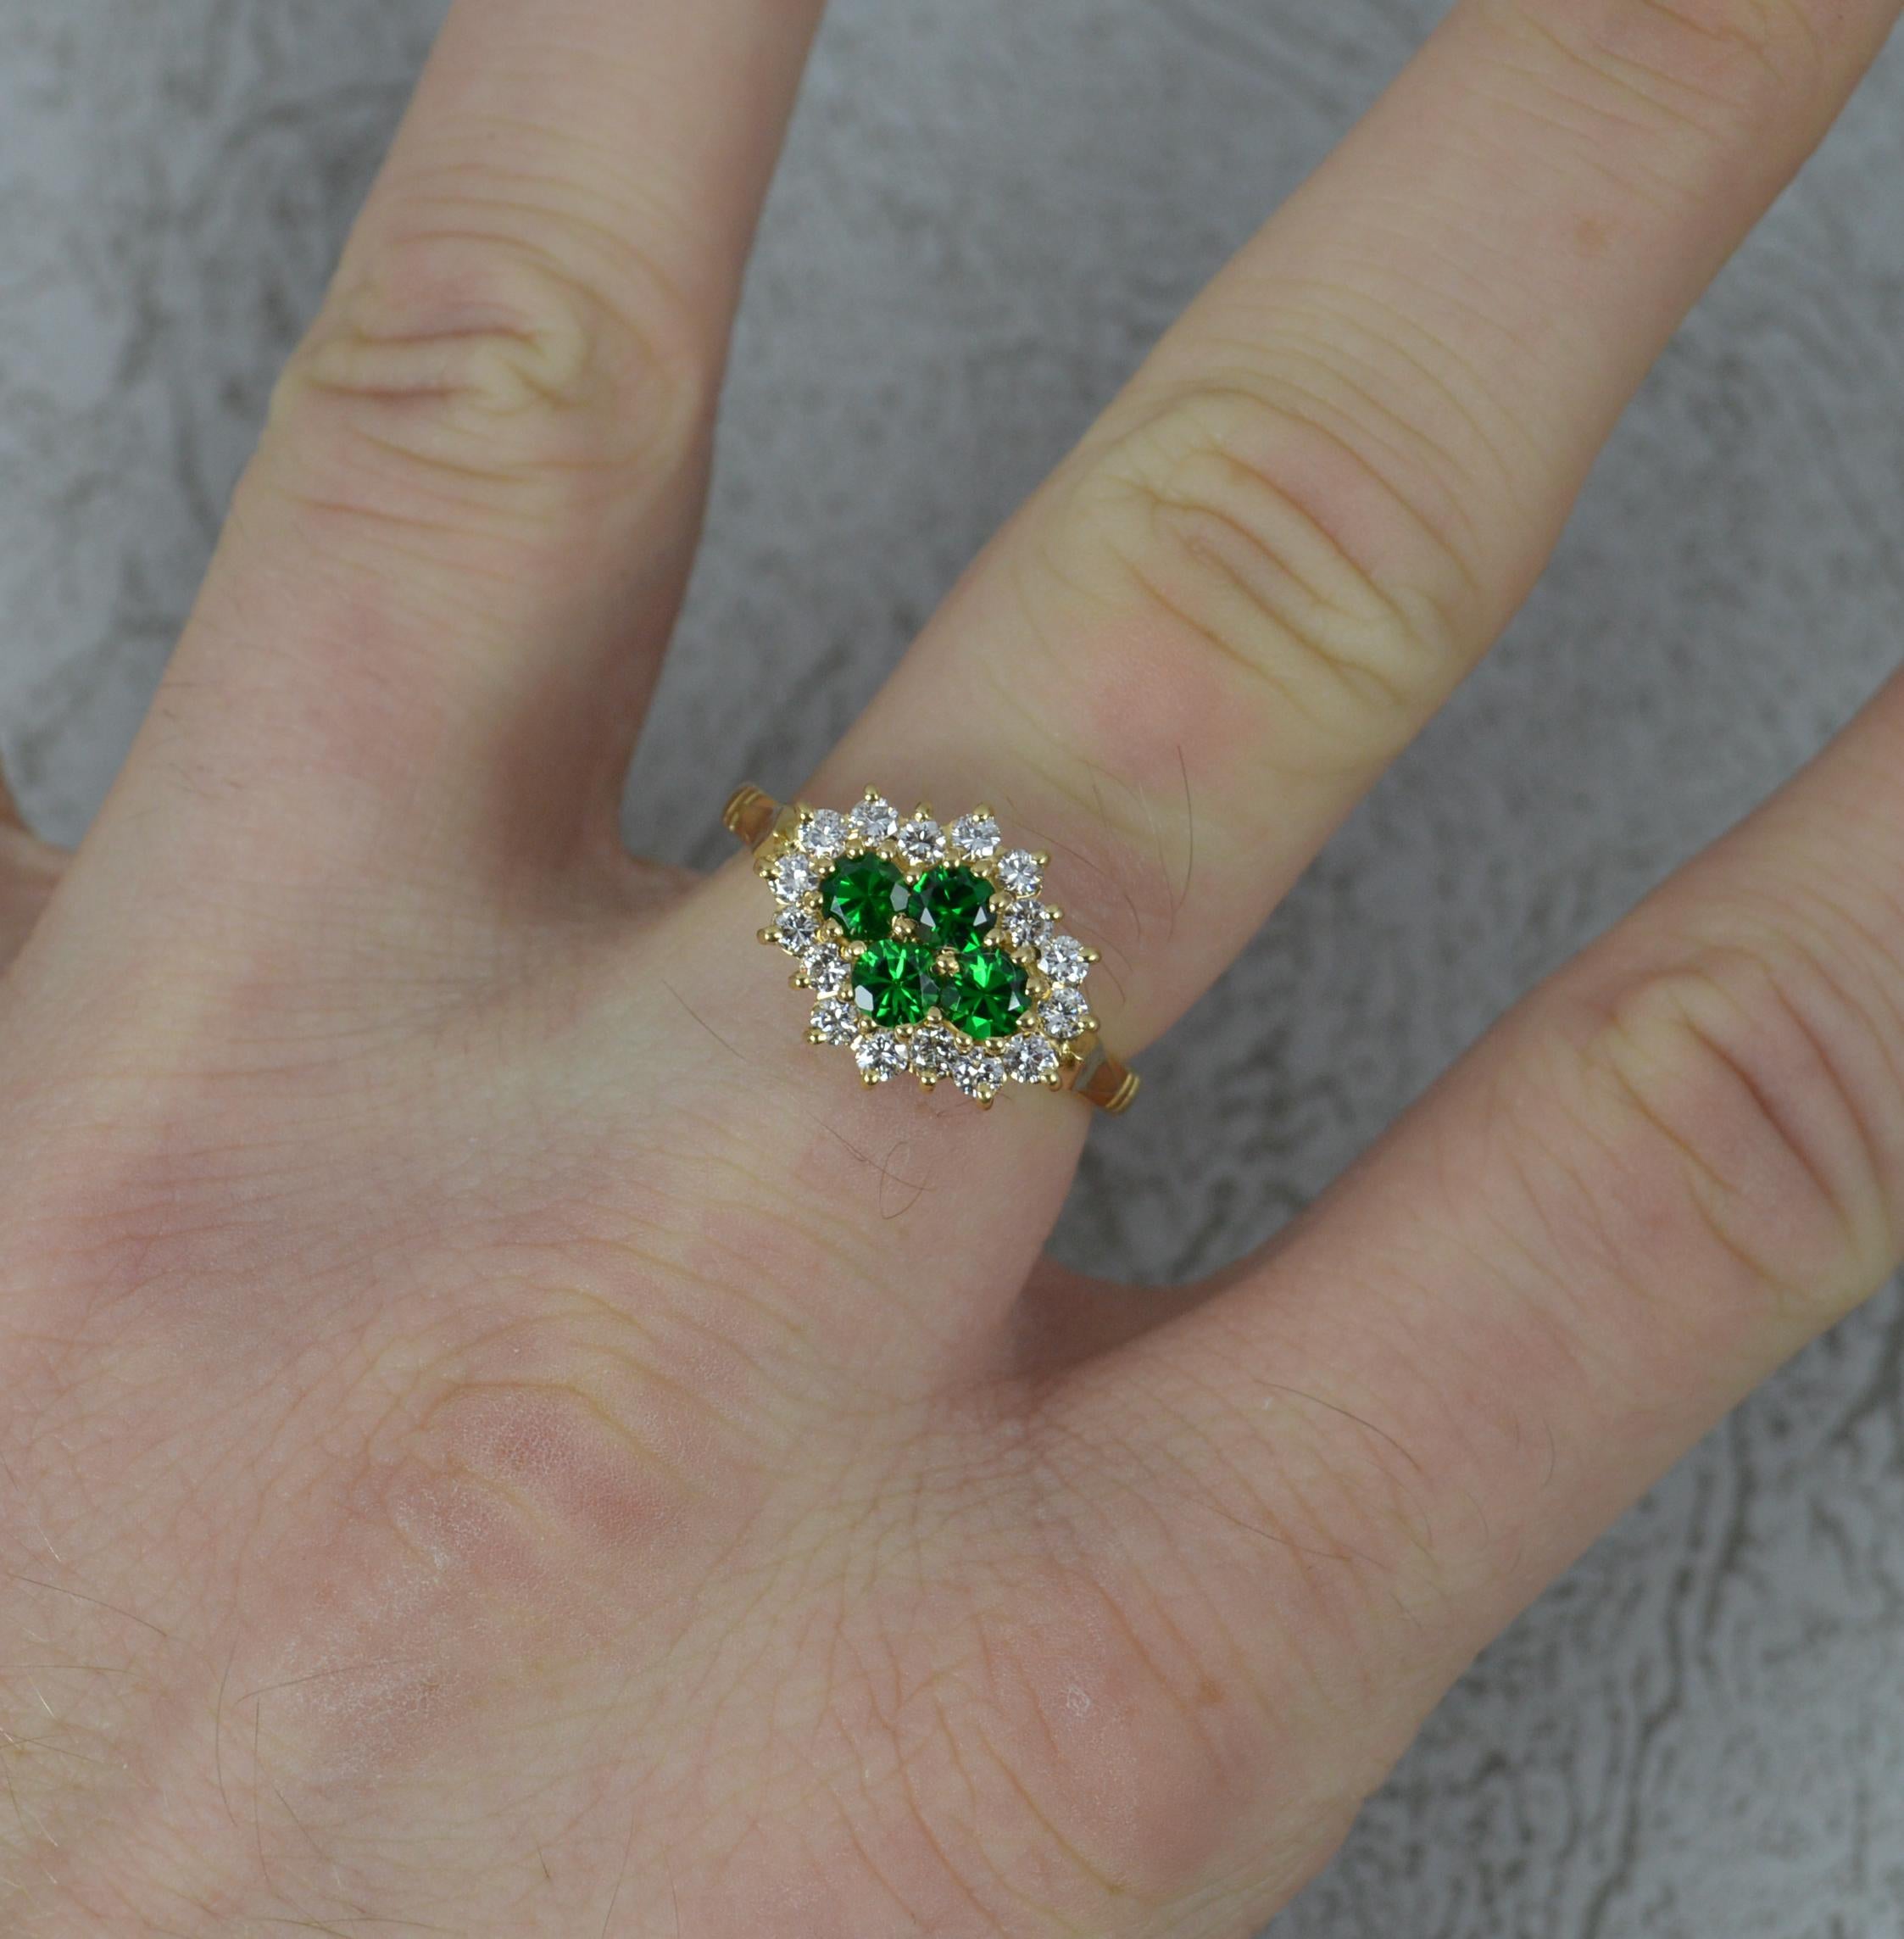 A superb contemporary cluster engagement ring.
Solid 18 carat yellow gold example.
Set with four round cut green garnet stones. Surrounded by a full border of 16 natural, round brilliant cut diamonds.
14mm x 11mm cluster head.

CONDITION ;